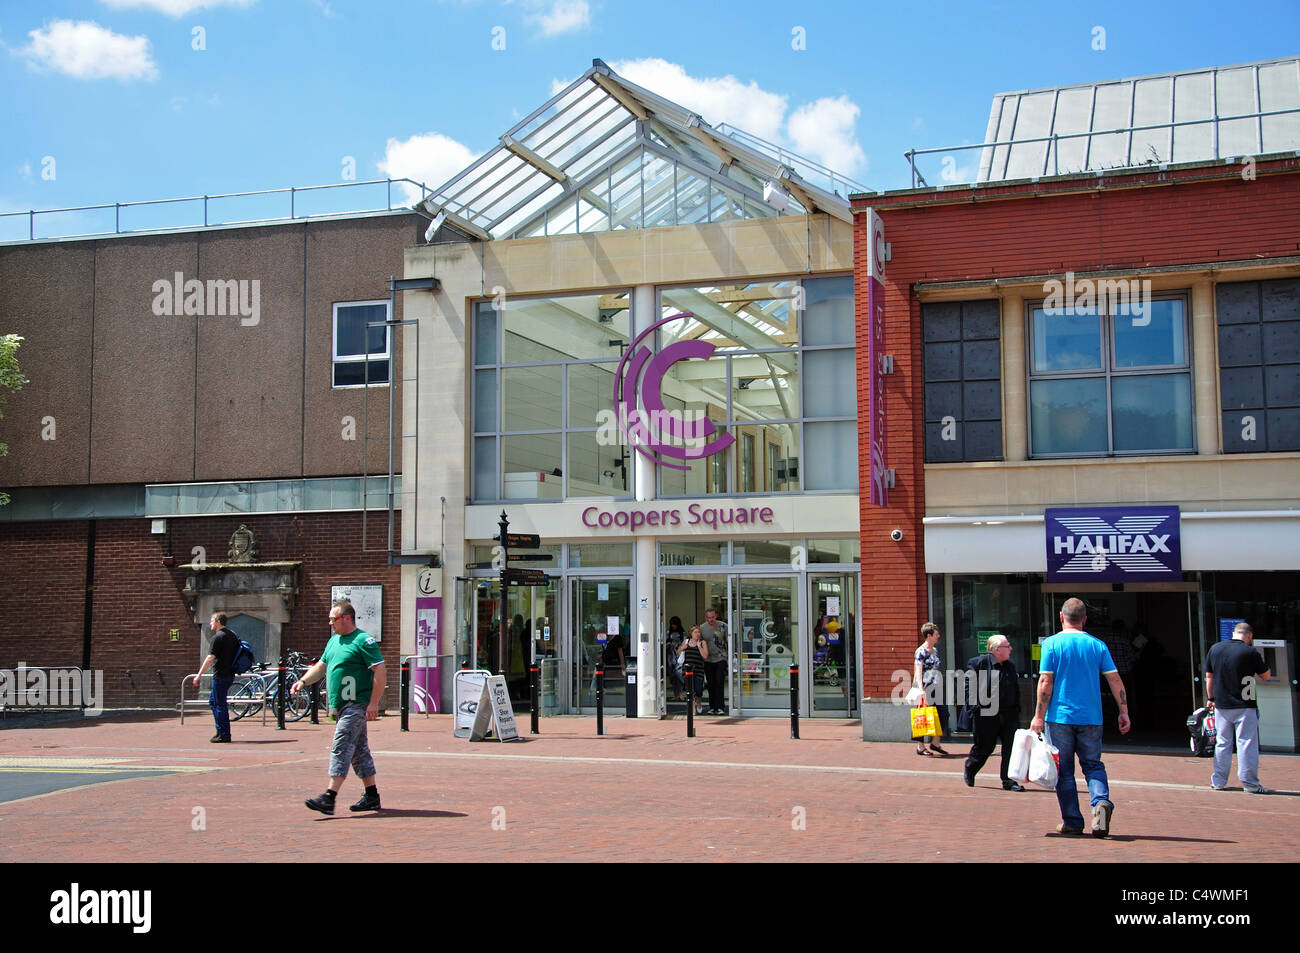 Coopers Square Shopping Centre, High Street, Burton upon Trent, Staffordshire, England, United Kingdom Stock Photo